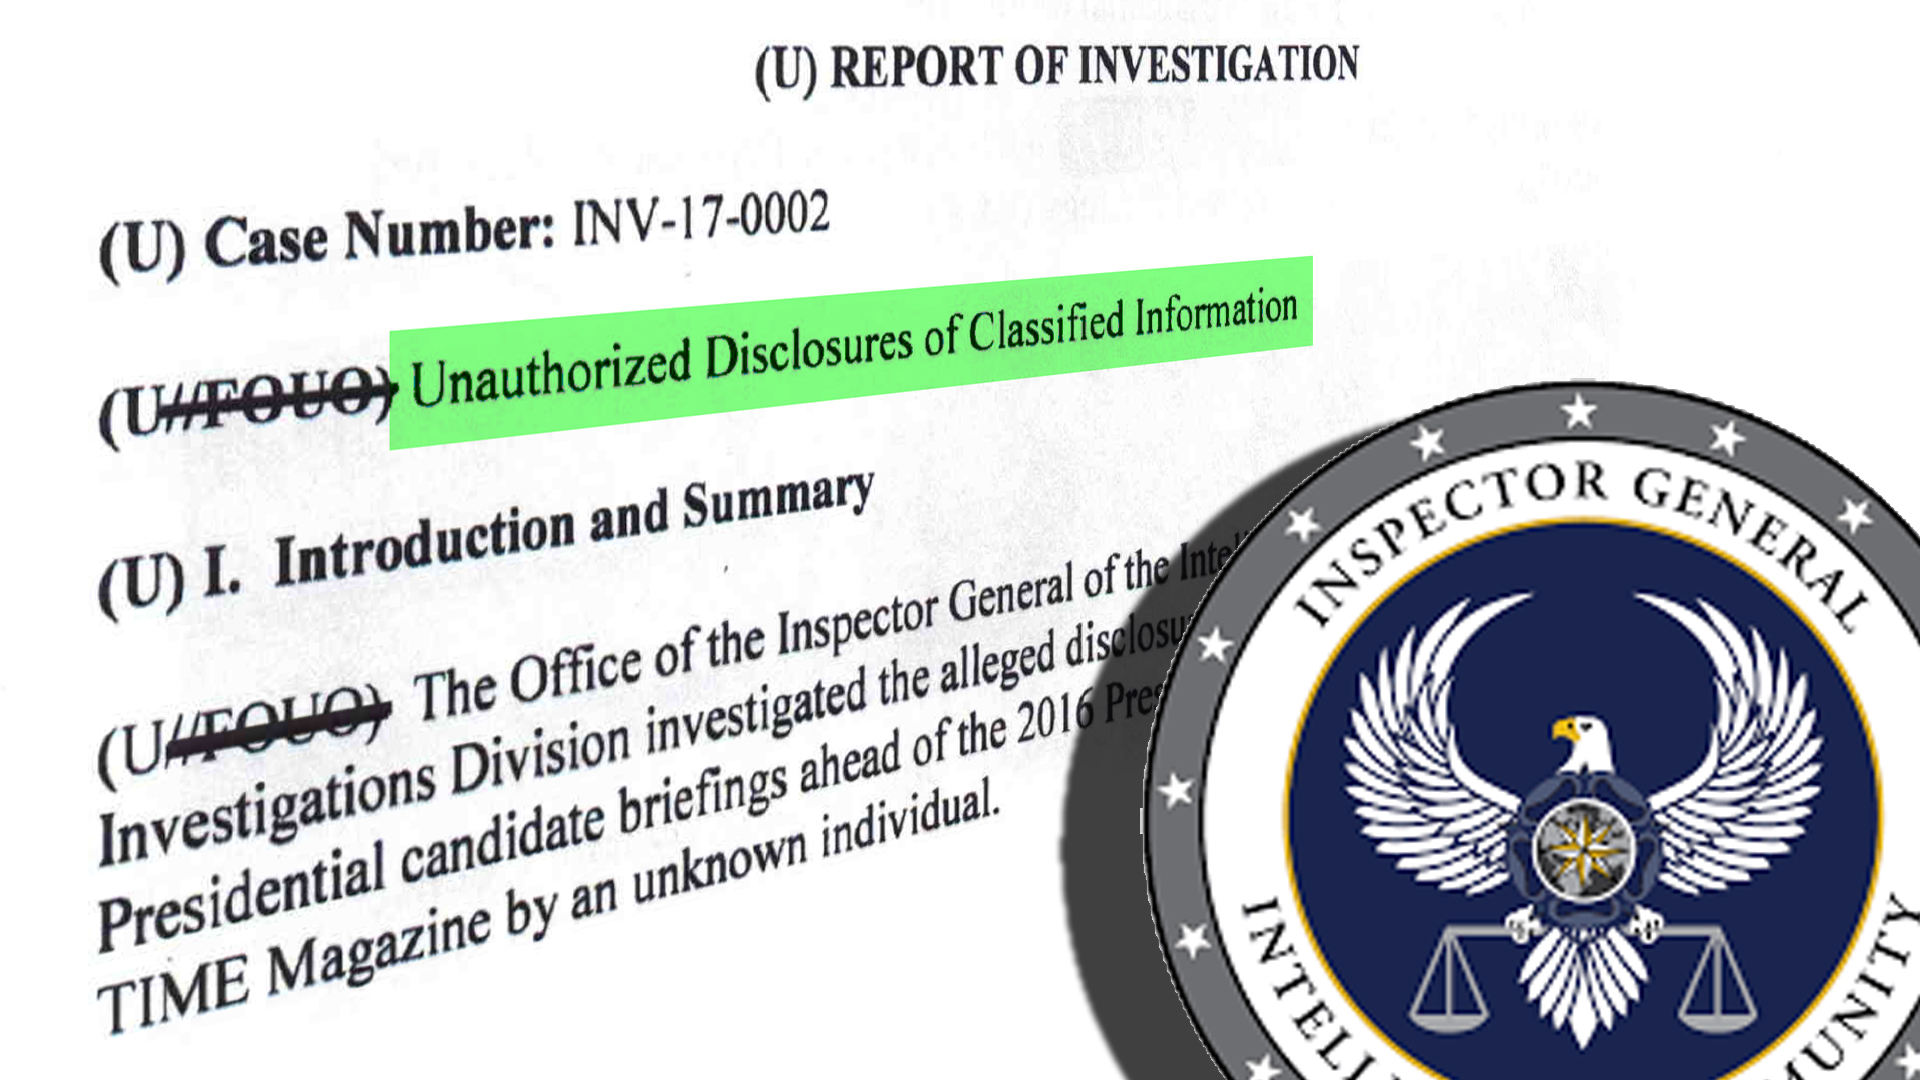 Alleged Unauthorized Disclosures of Classified Information – Office of the Inspector General of the Intelligence Community – Case: INV-17-0002 – 2017